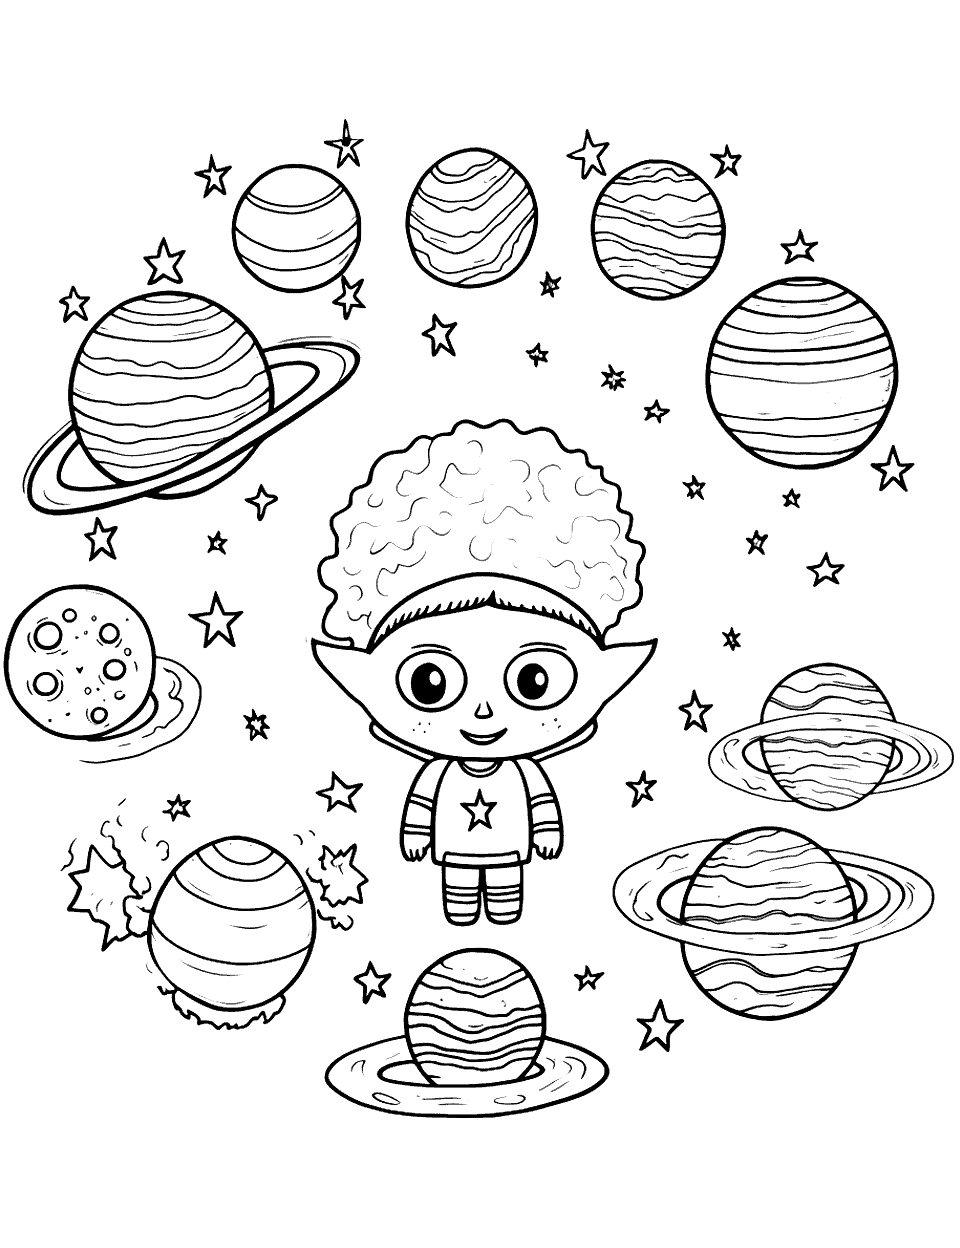 Alien Observing Planets Solar System Coloring Page - A powerful sentient alien observing the planets for disturbance.